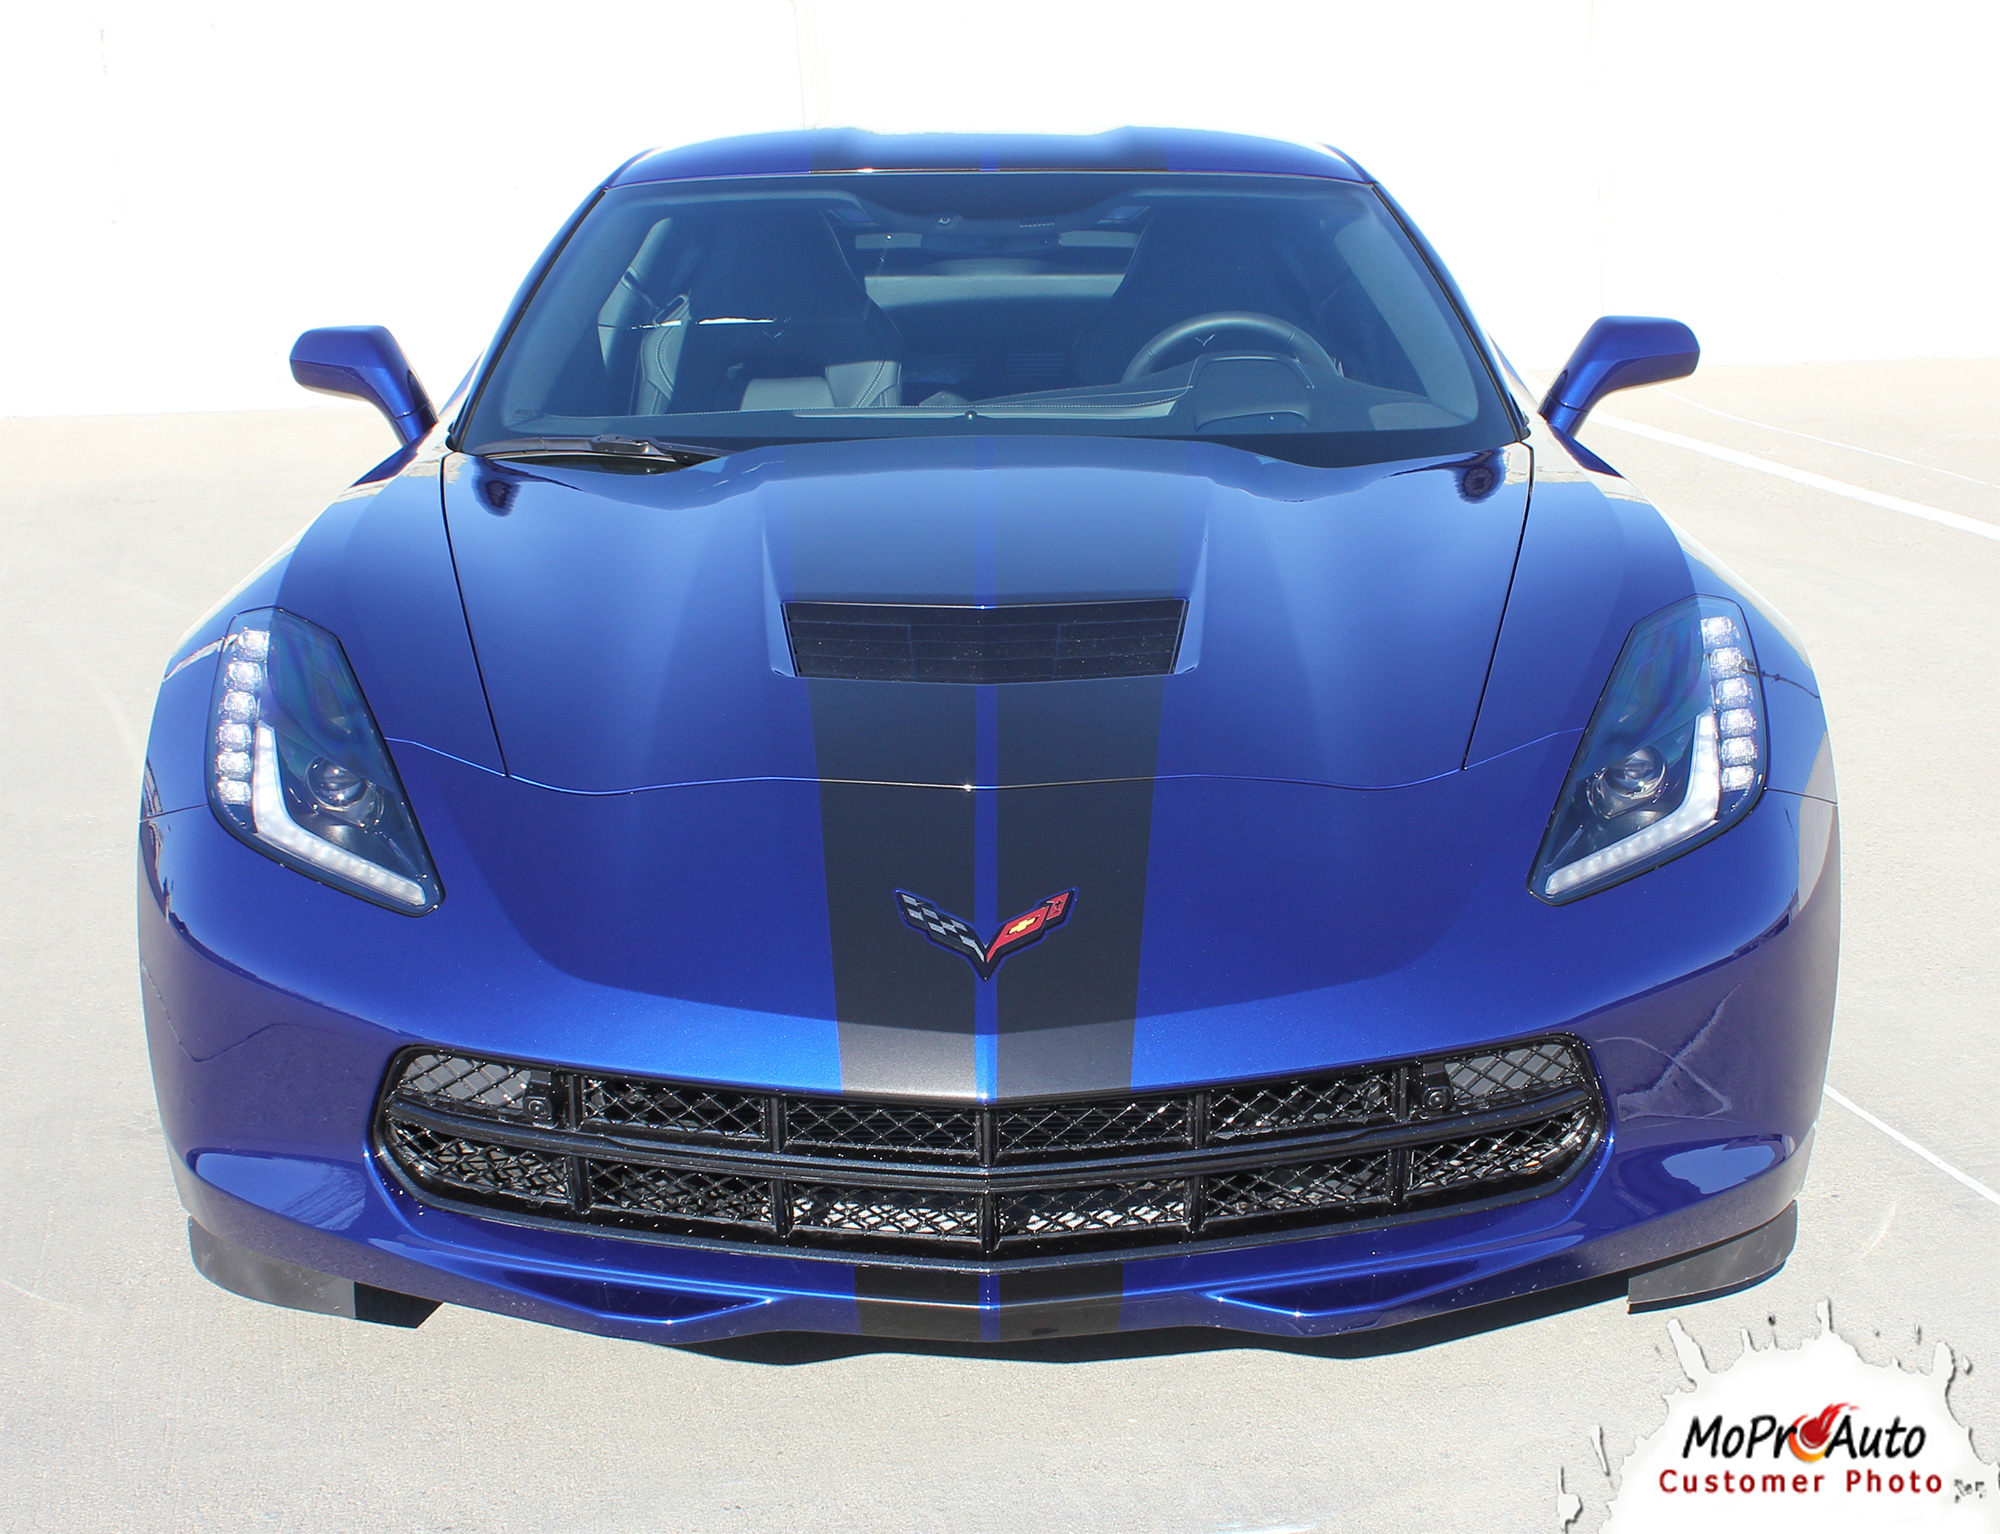 Chevy Corvette C7 Hood Blackout Vinyl Graphics Stripes Striping and Decal Kits for 2014 2015 2016 2017 2018 2019 Models